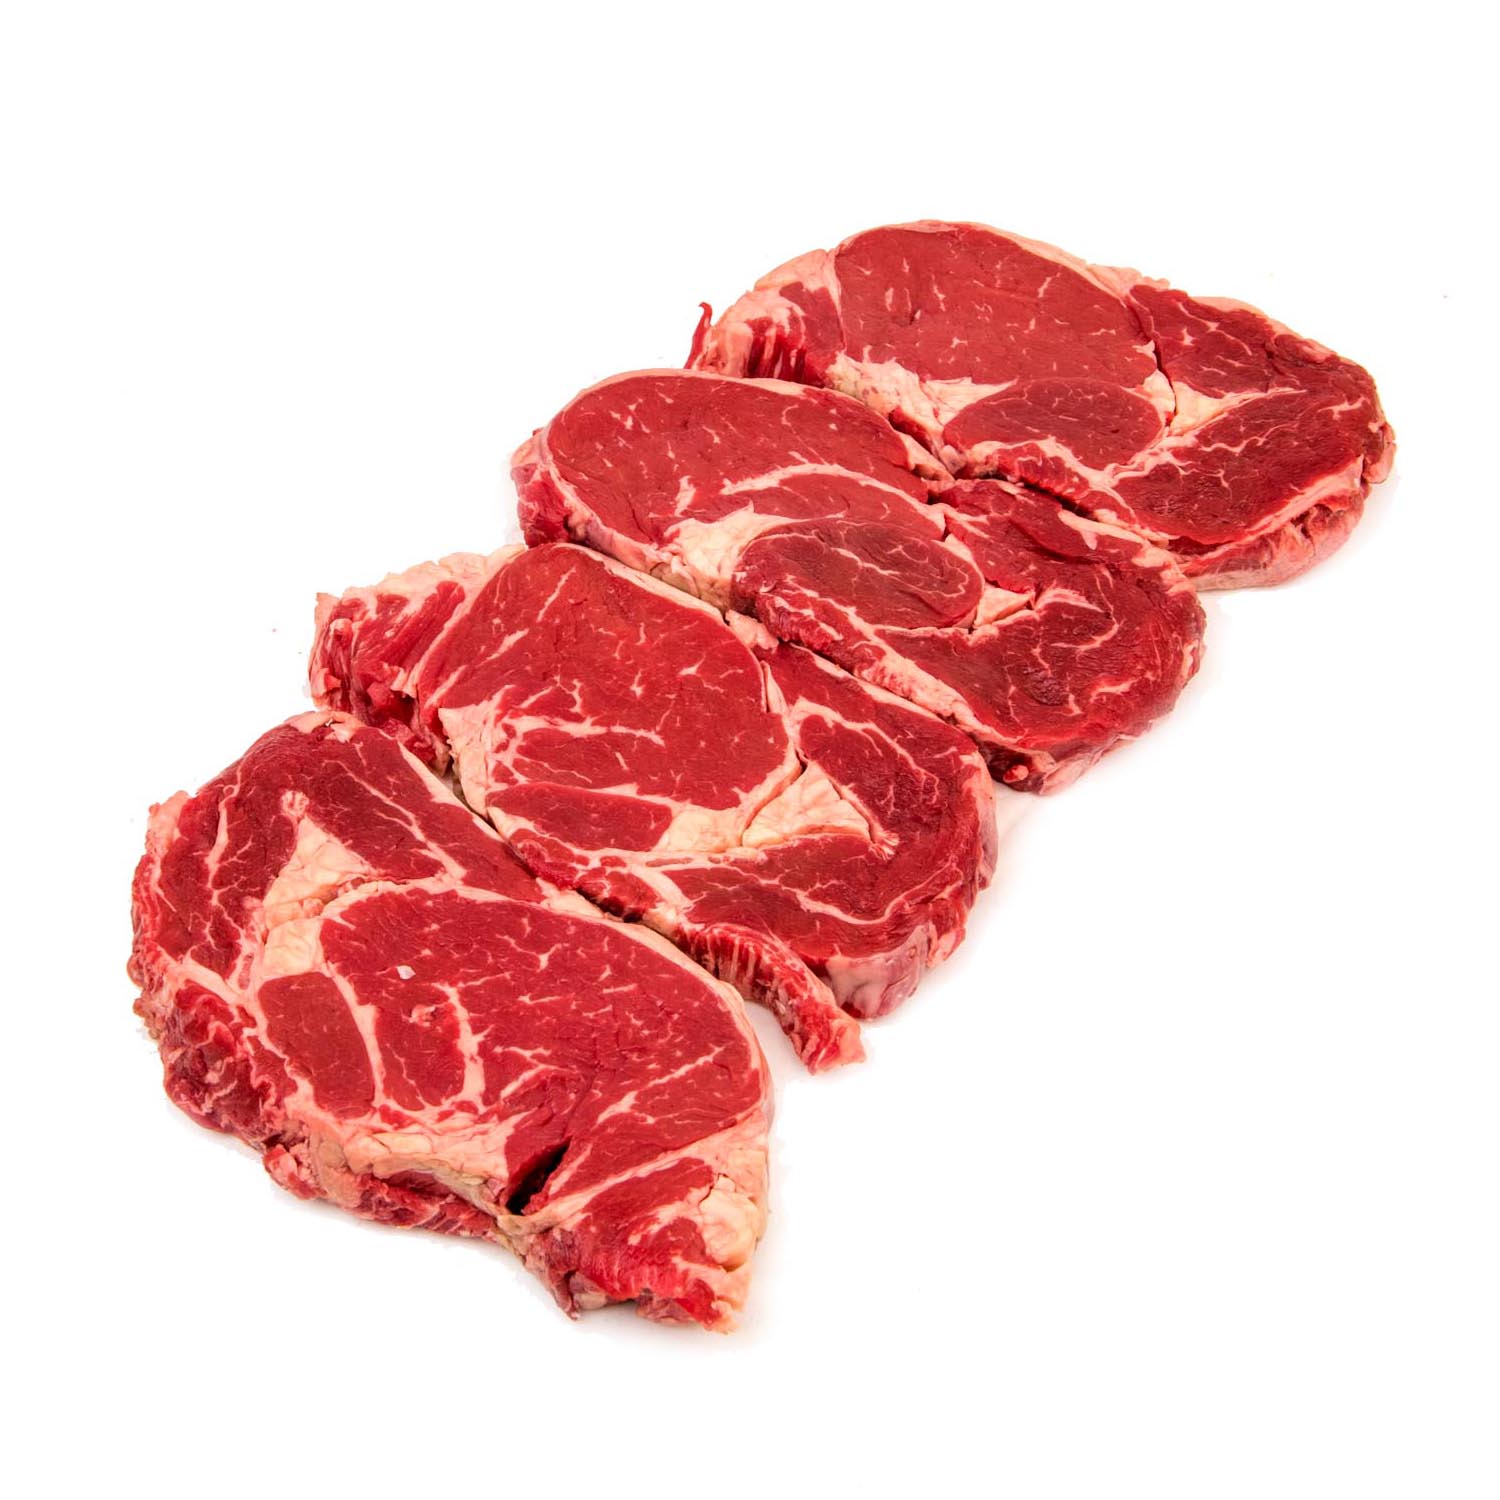 Ungraded Beef ribeye - Page 2 - RedFlagDeals.com Forums